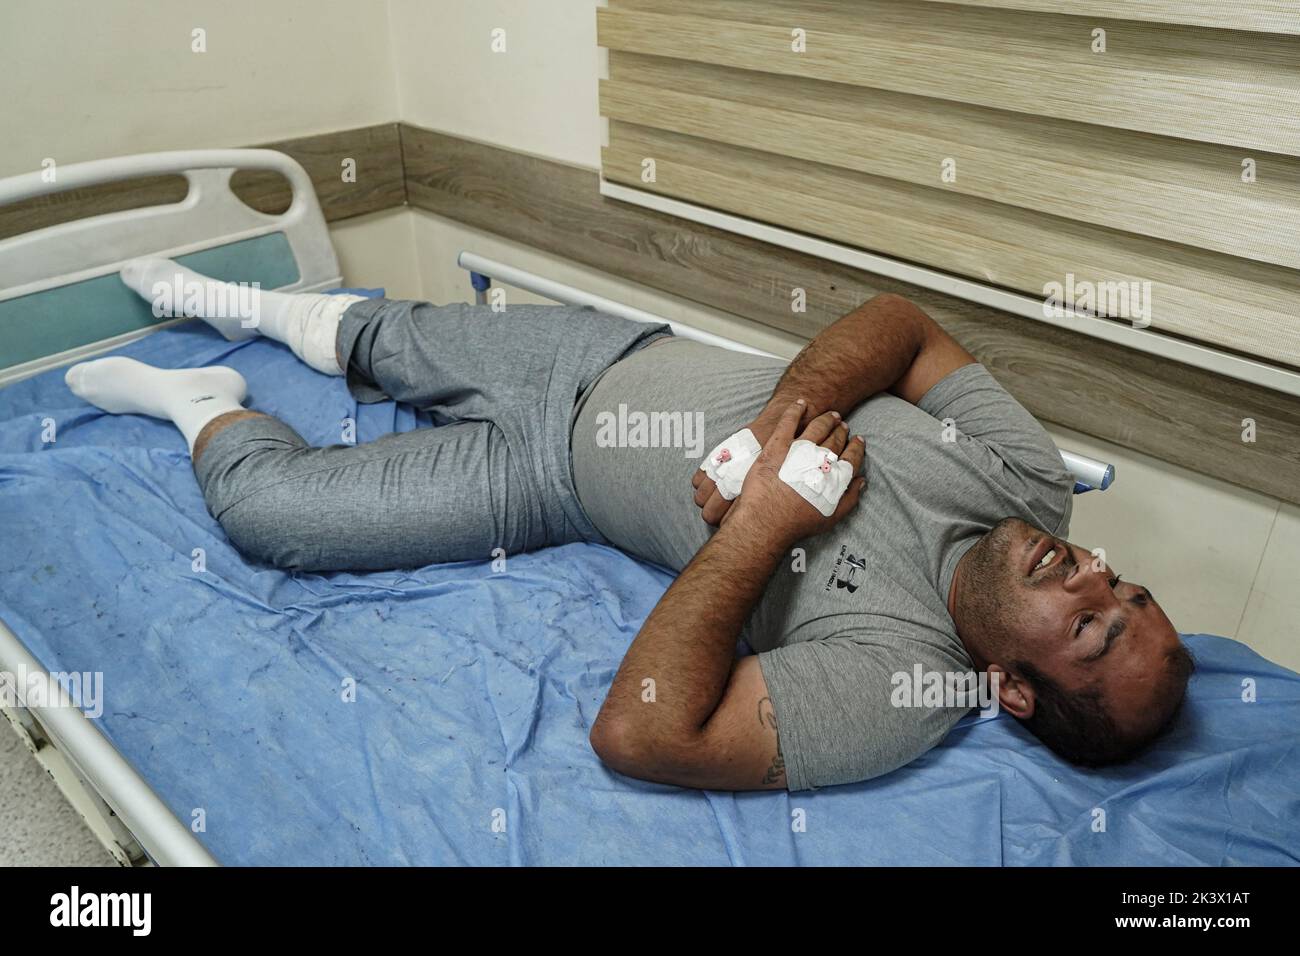 28 September 2022, Iraq, Erbil: A wounded member of the opposition Kurdistan Freedom Party (PAK) lies on a bed at a hospital following attacks by Iranian explosives-laden drones and rockets targeting the opposition Kurdistan Freedom Party (PAK), the Kurdistan Democratic Party of Iran (KDPI), the Free Life Party of Kurdistan (PJAK), and Komala in the provinces of Erbil and Sulaymaniyah, Kurdish media reported. The death toll from the attacks on opposition groups in the autonomous region of Kurdistan rose to nine and at least 32 were also injured, Iraq's state news agency INA quoted Barzinji as Stock Photo